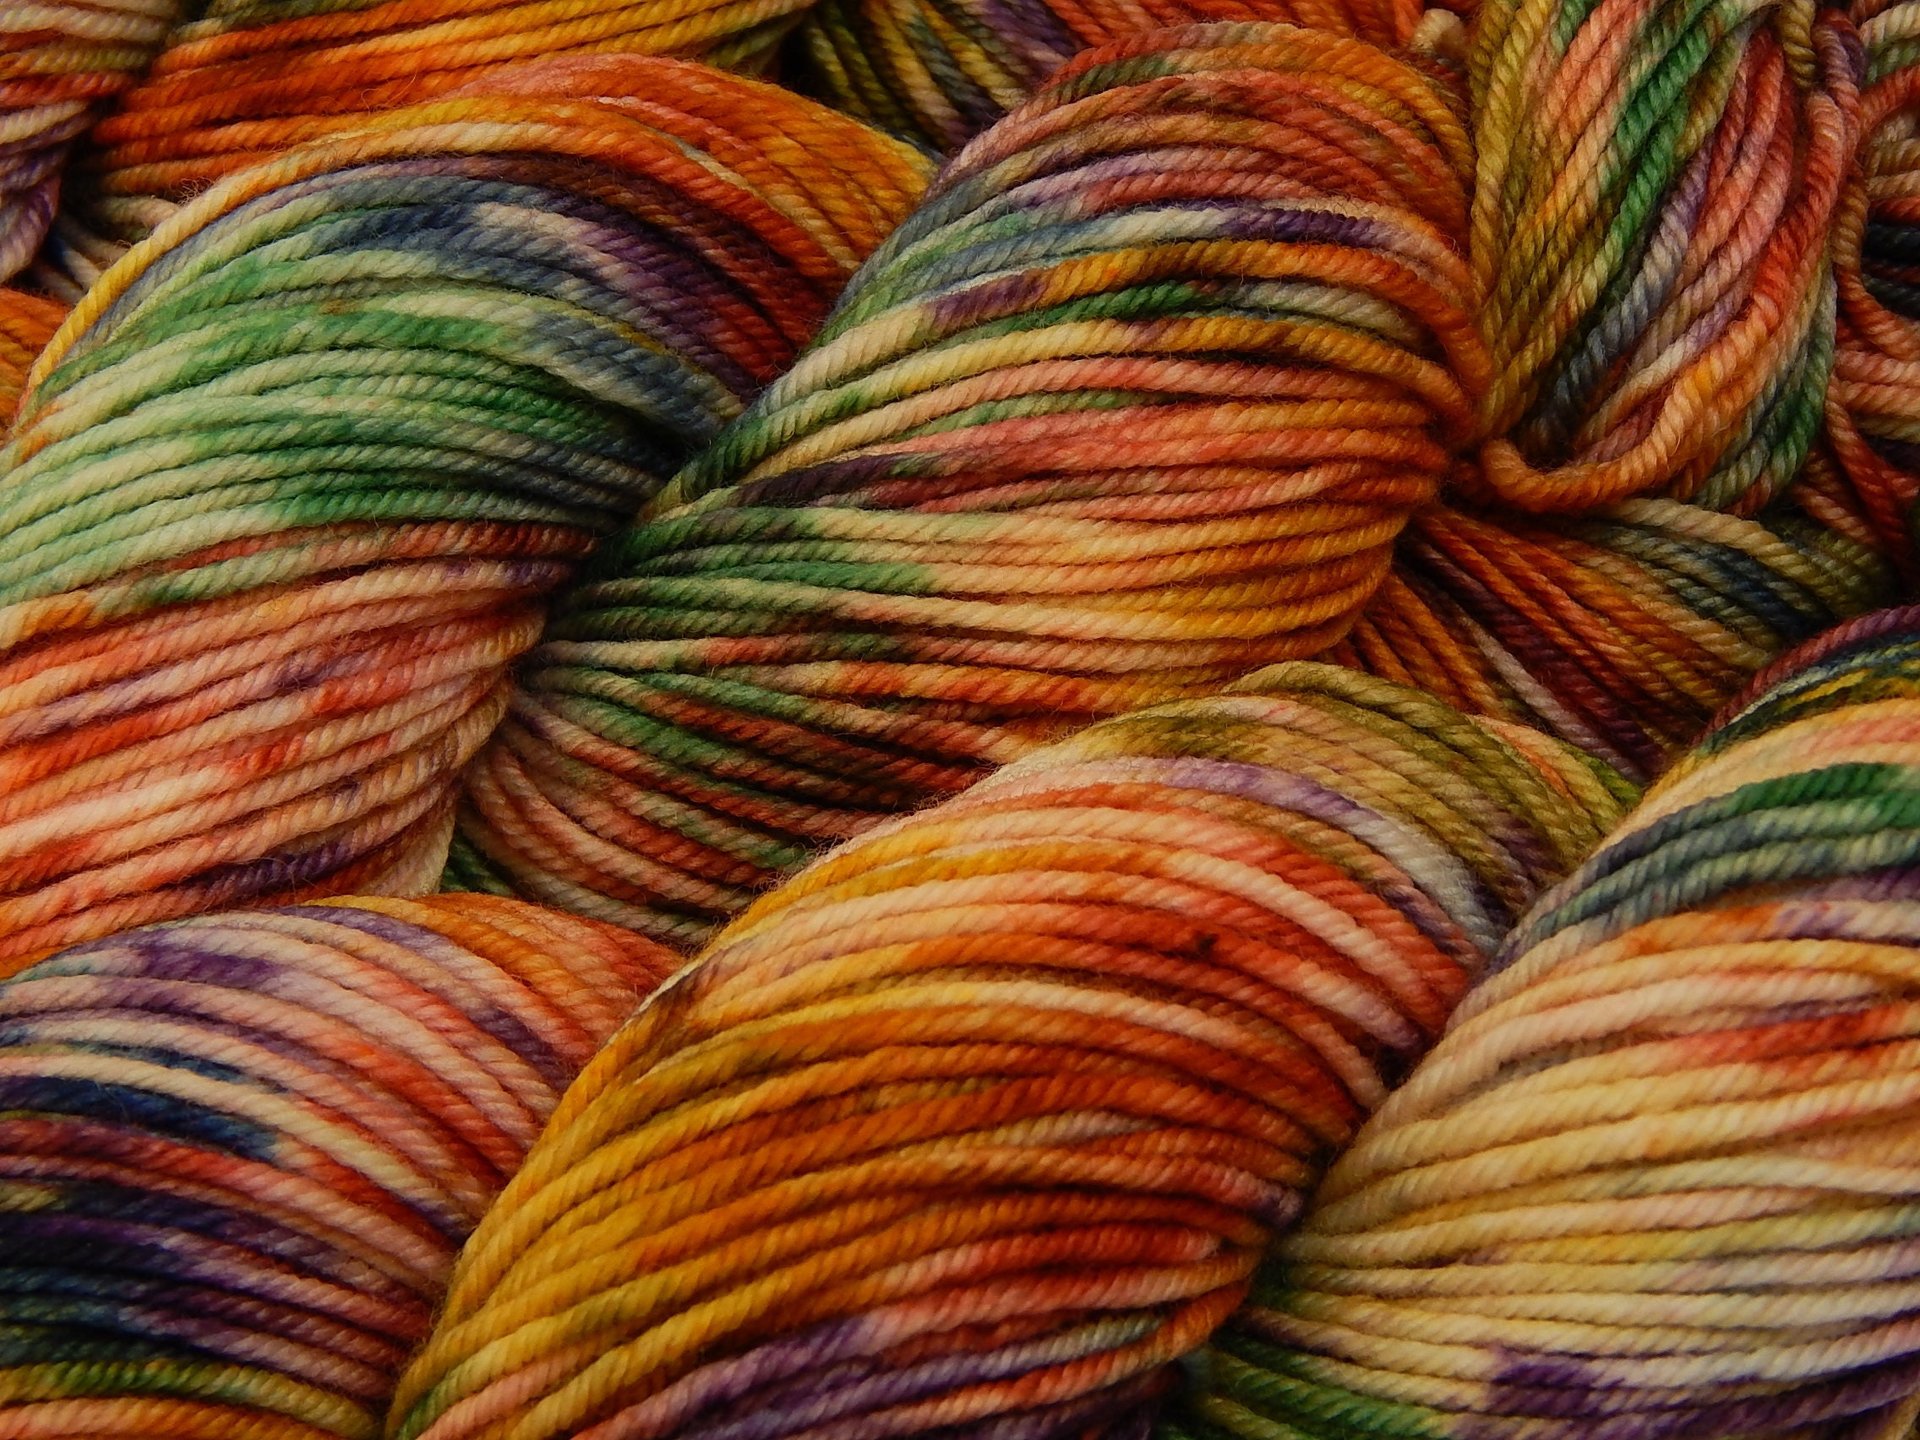 Hand Dyed Yarn, DK Weight Superwash Merino Wool - Potluck Crayons - Colorful Off White Rainbow Speckled Splashed Indie Dyed Knitting Yarn